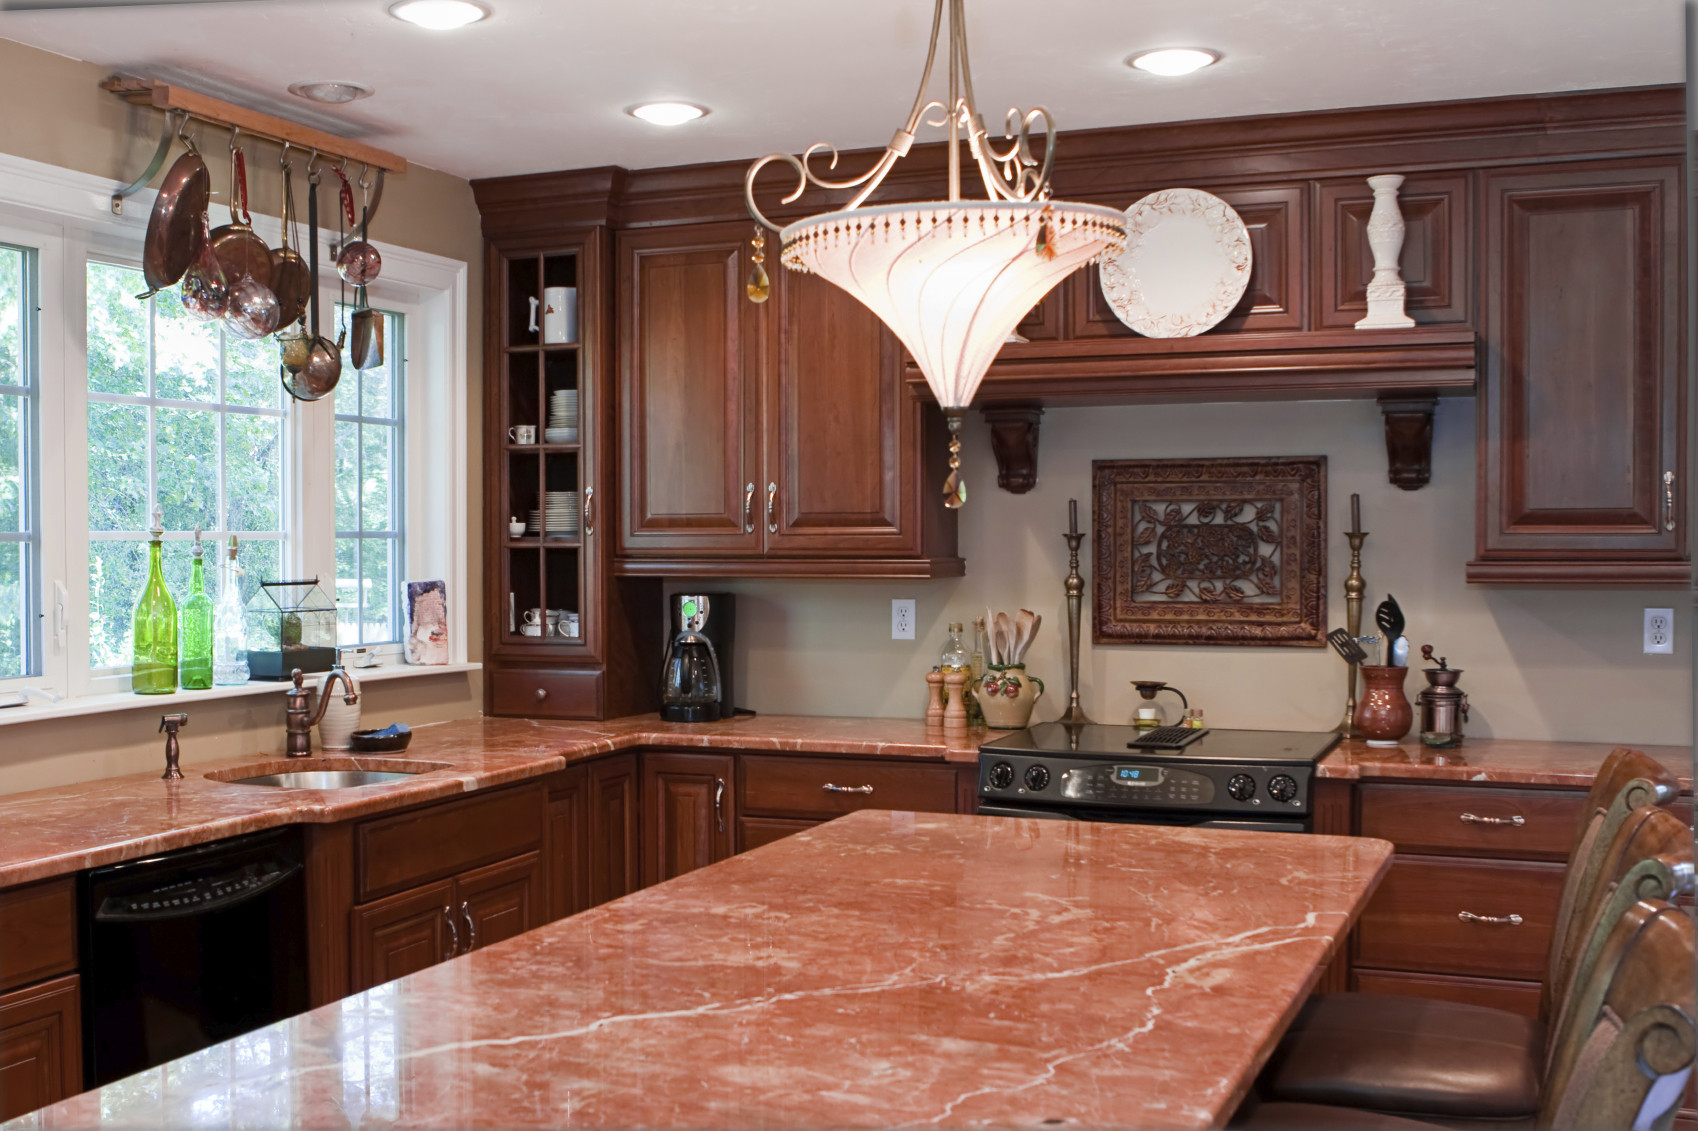 Kitchen Counter Tile
 The Pros & Cons of Tile Countertops